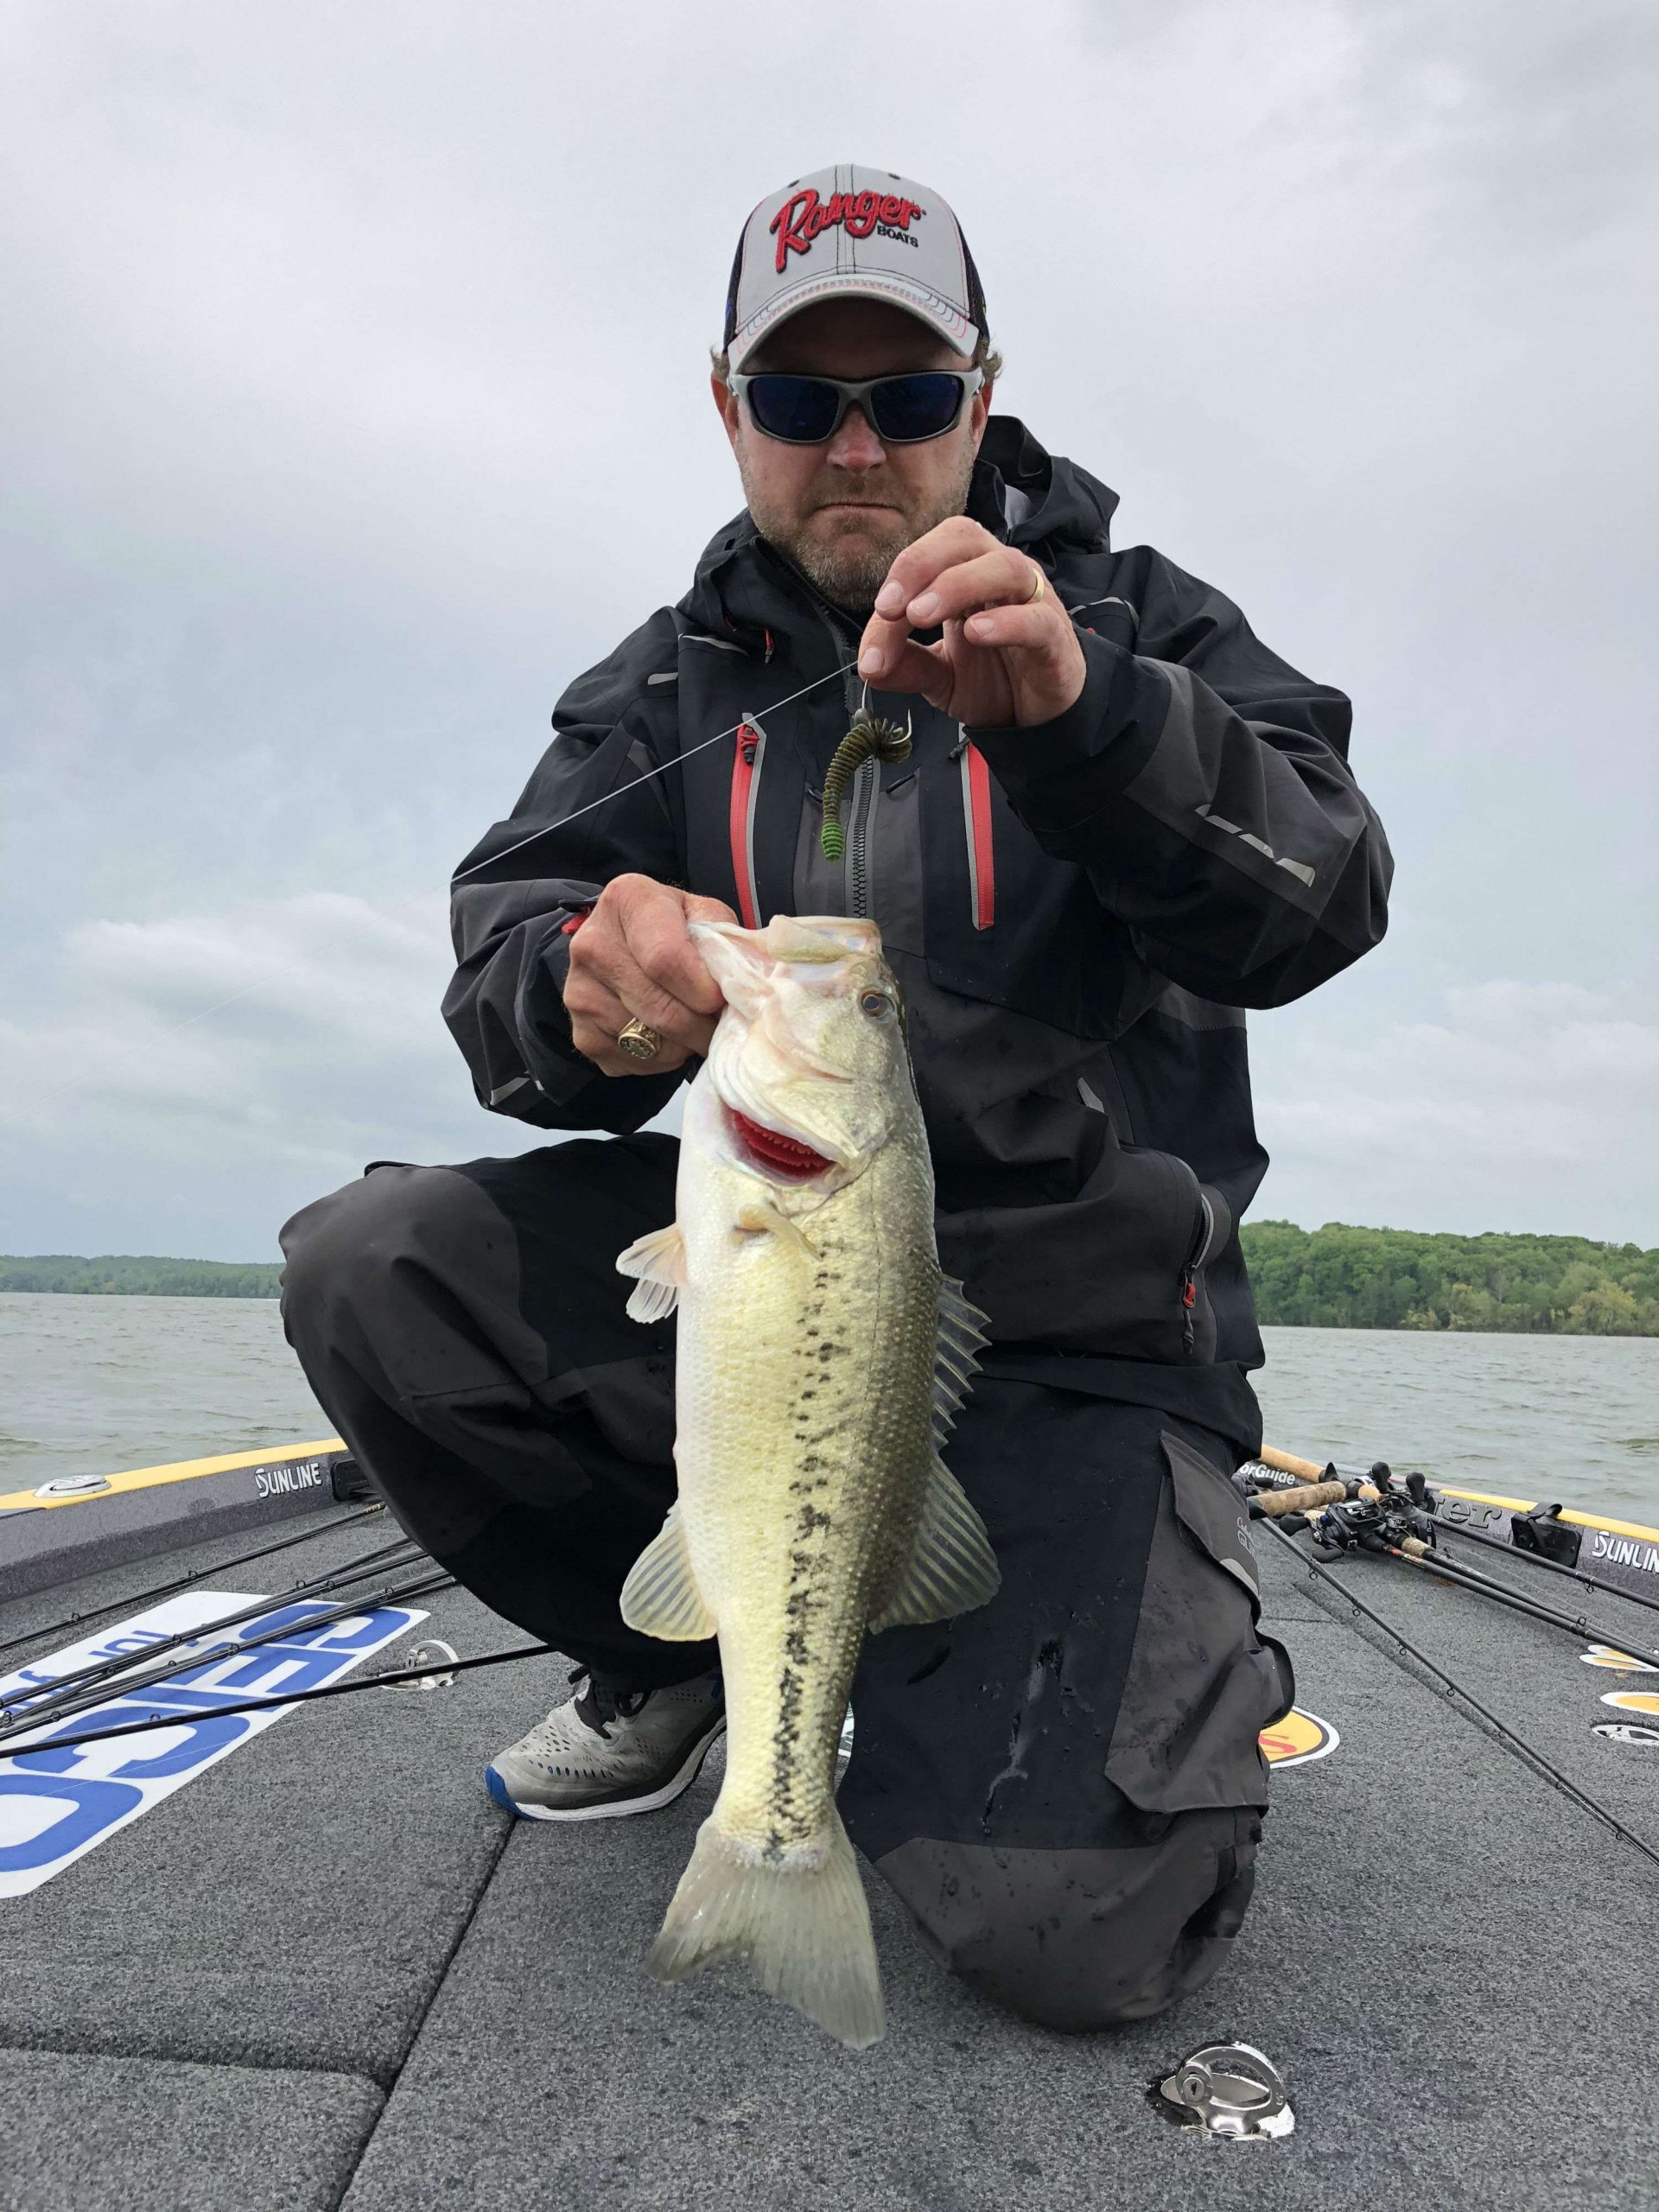 Mike McClelland has been showing extraordinary patience all morning sticking with a pattern he believes is developing here on Kentucky Lake. He has continued to give his area a chance to produce by thoroughly covering areas that share the same characteristics. He has caught several non-keepers yet patiently continues to work the work the area. With one in the livewell, the only question is, âWill his patience finally prove fruitful?â
